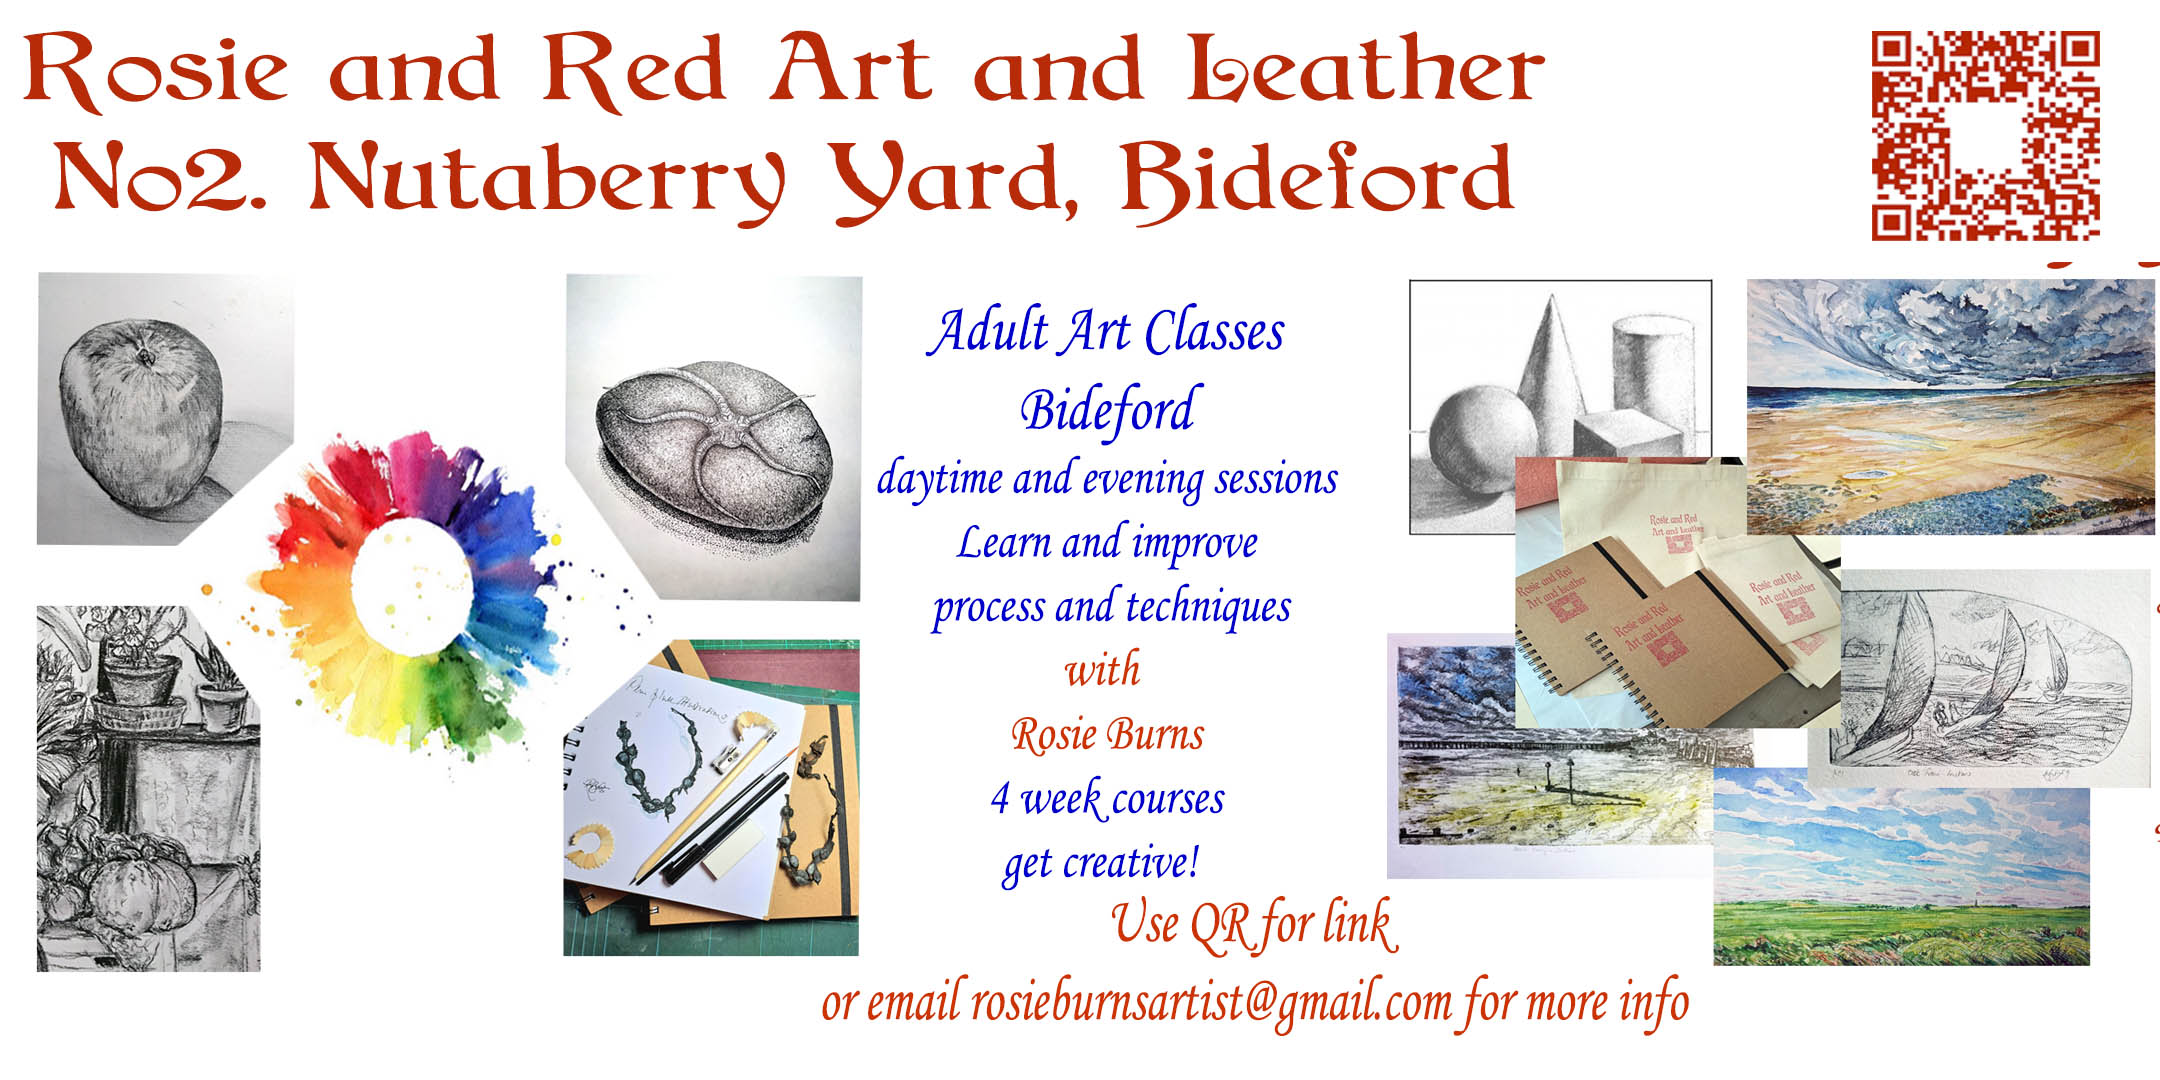 Workshops and Classes